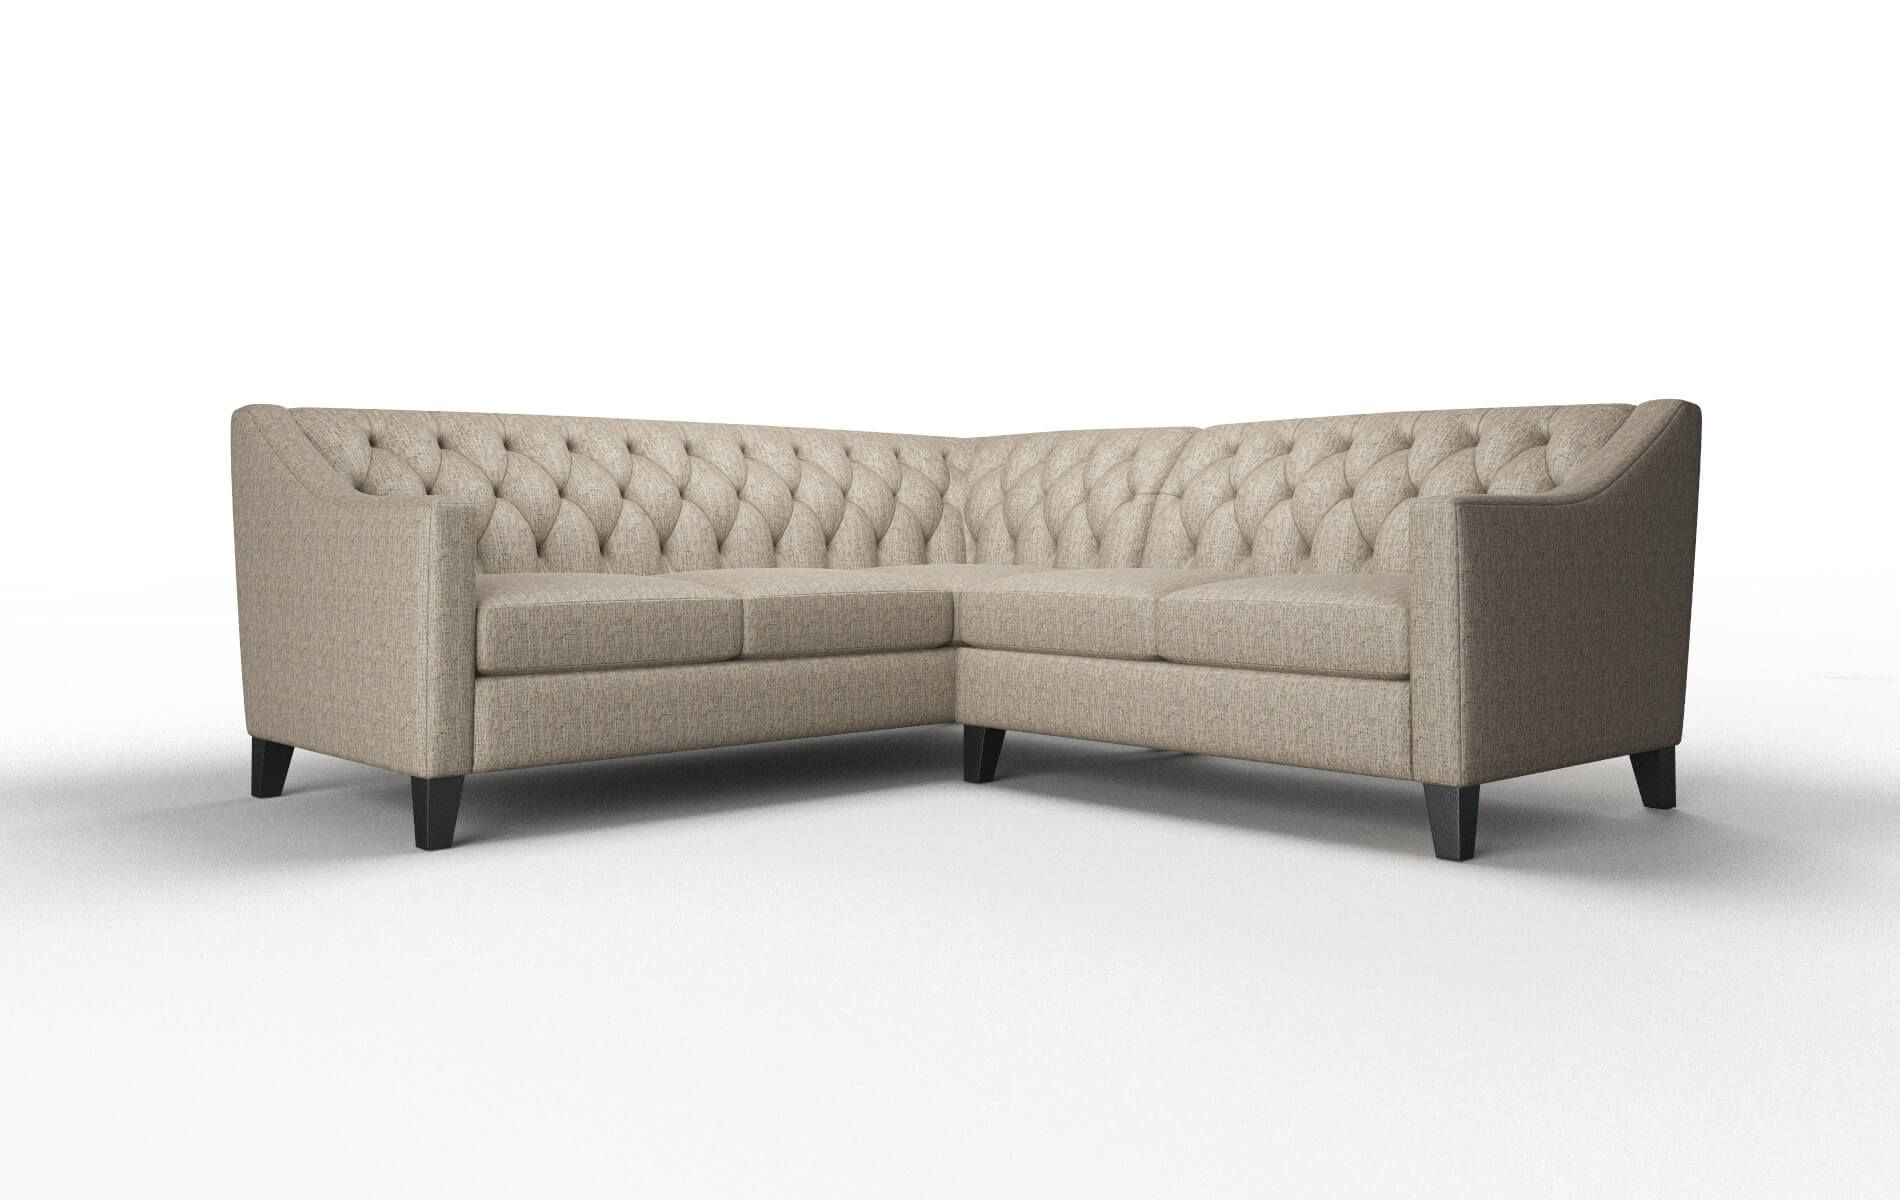 Seville Solifestyle 51 Sectional espresso legs